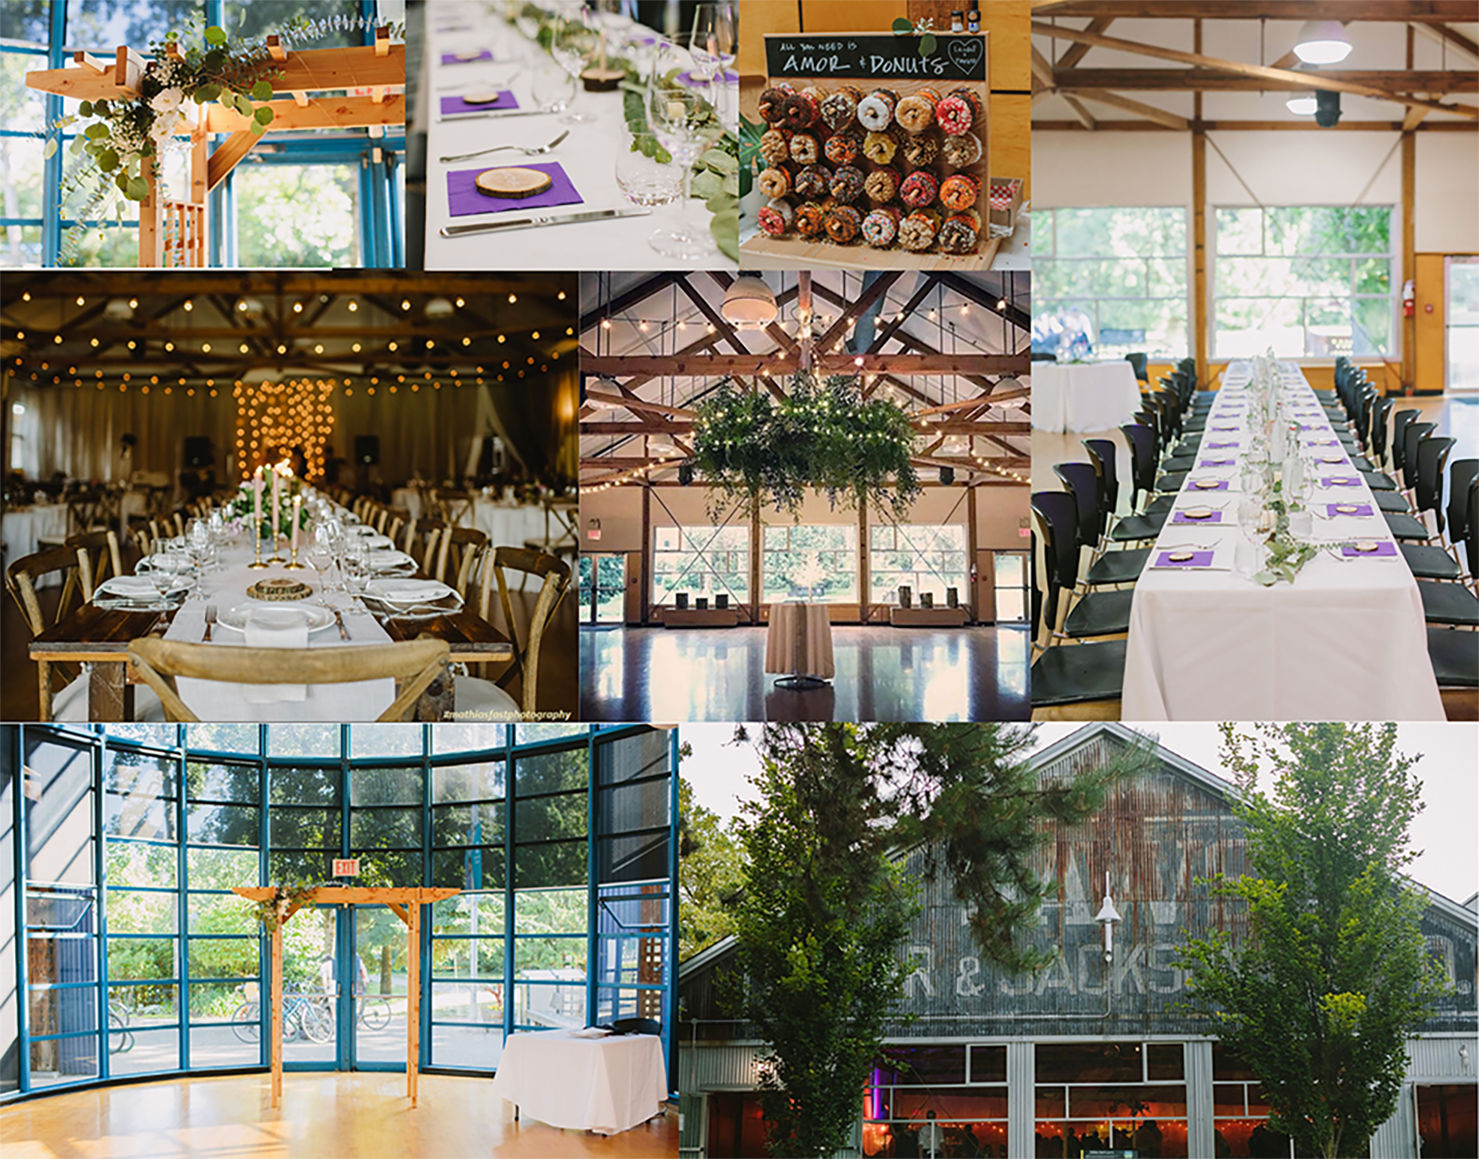 False Creek Community Centre is located on the beautiful Granville Island and overlooks the waterfront. Both our Tyee Hall and Lind Hall are suitable spaces for your special day depending on the size of your guest list.